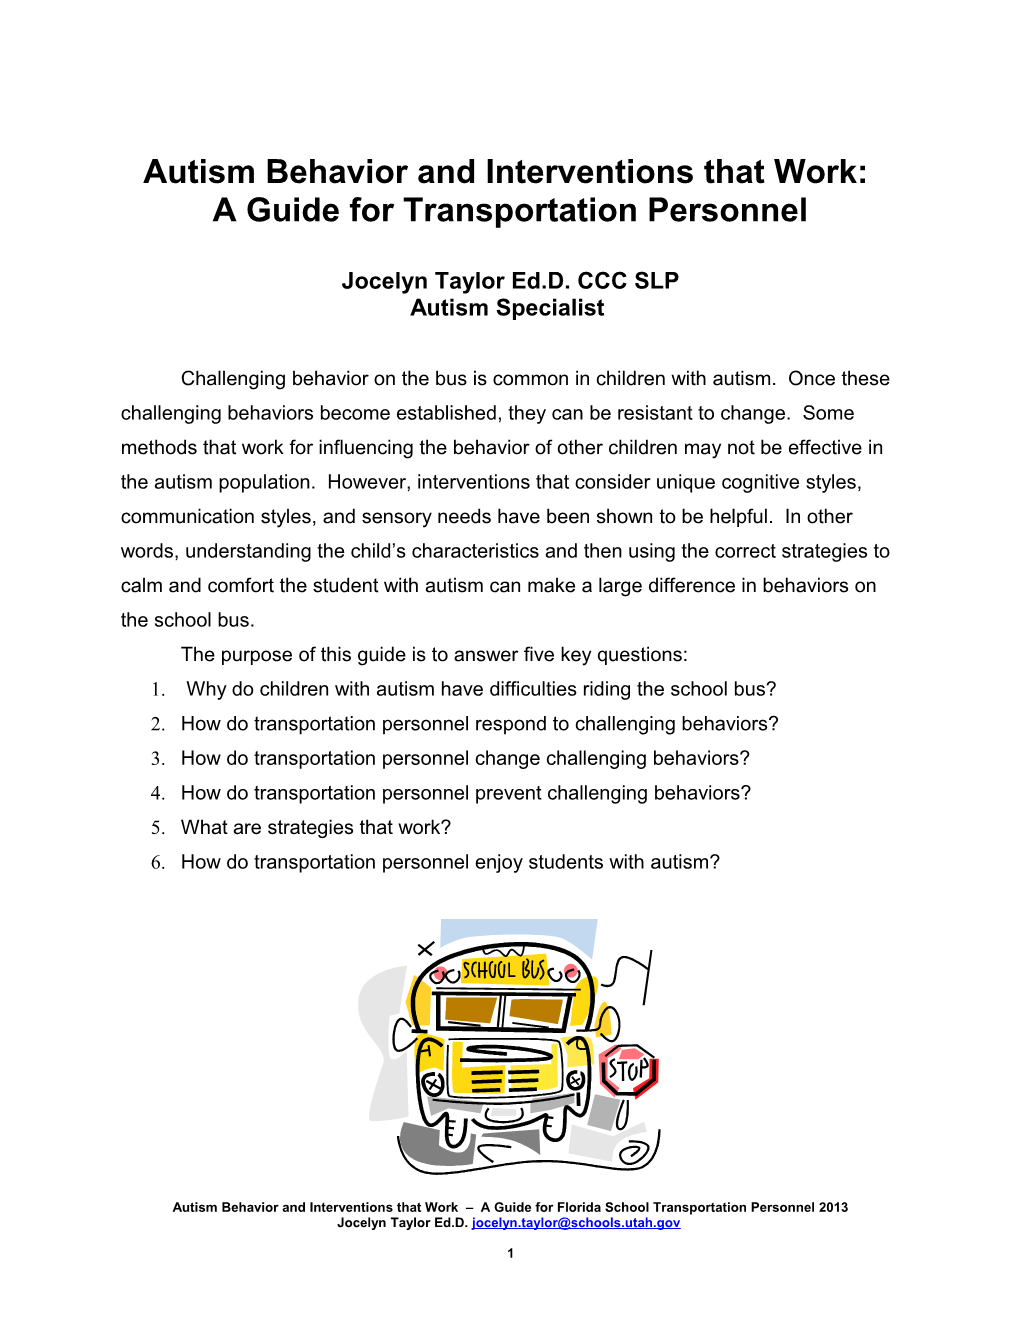 Ideas for Challenging Behavior and Autism